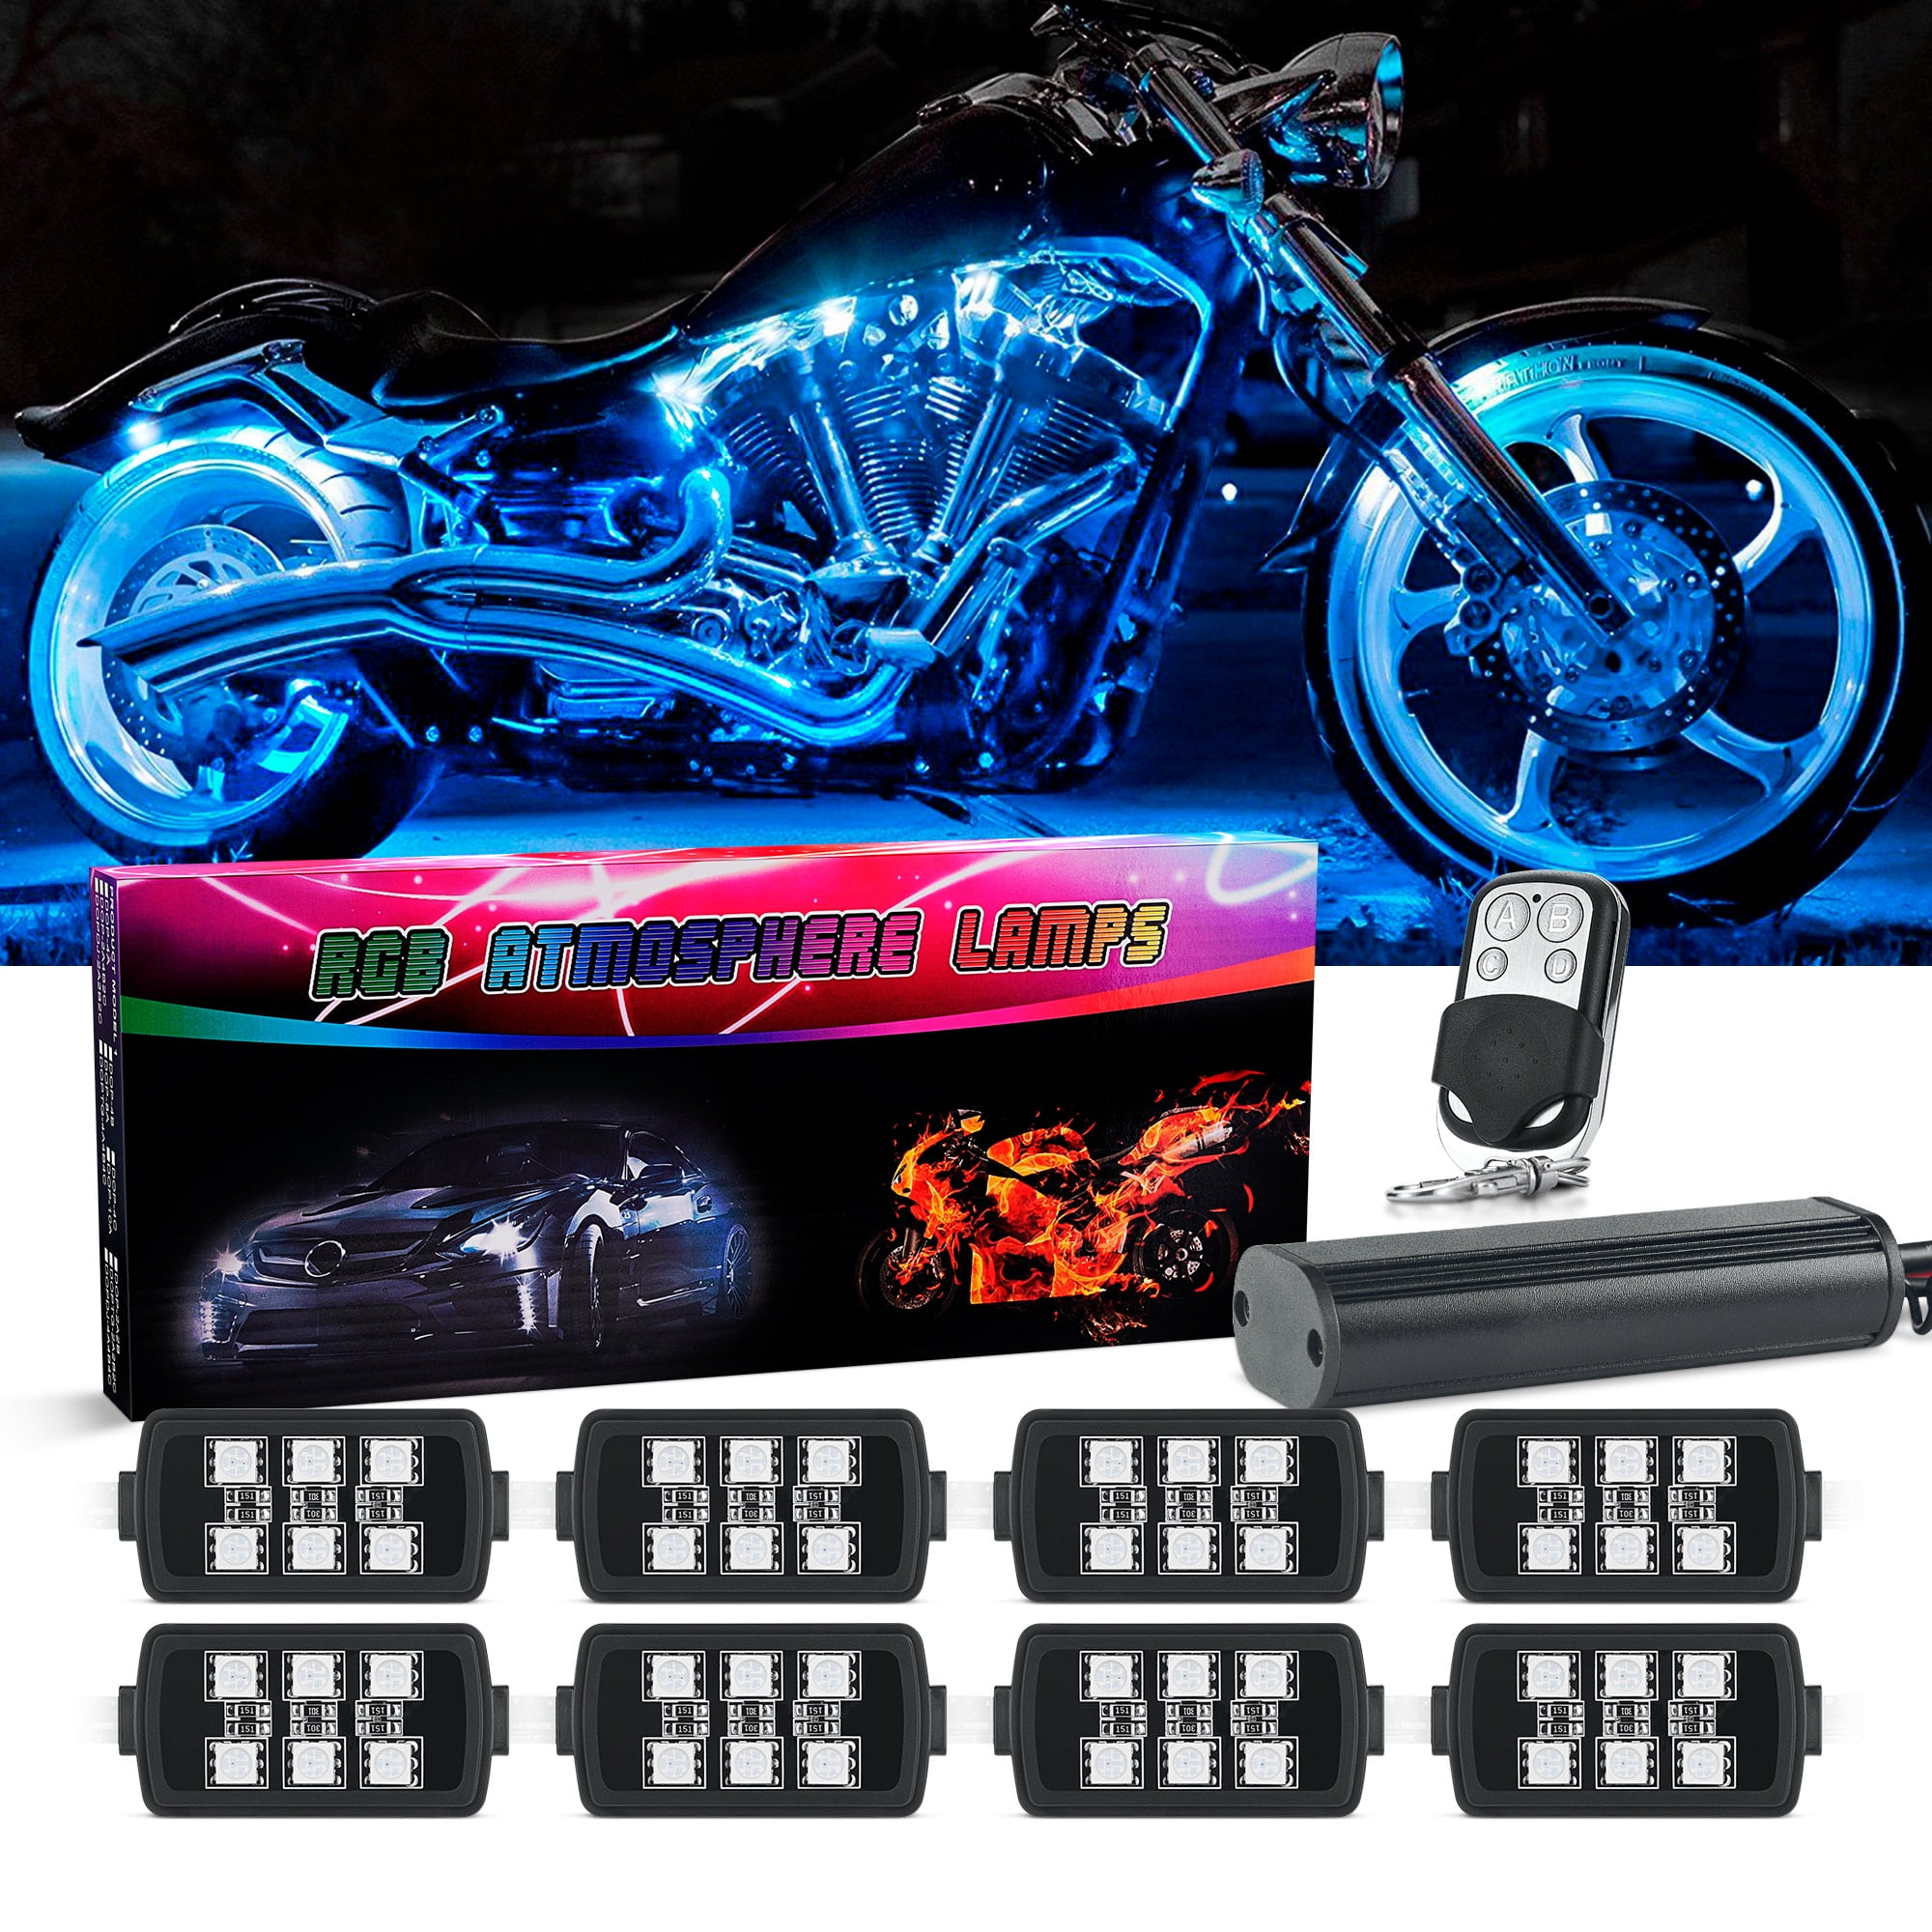 8pcs Motorcycle underglow LED Light Kit Multicolor Brake Light Function Waterproof Motorcycle Underlight Accessories Wireless APP Control RGB Motorcycle LED Strip Lights with Music Mode 